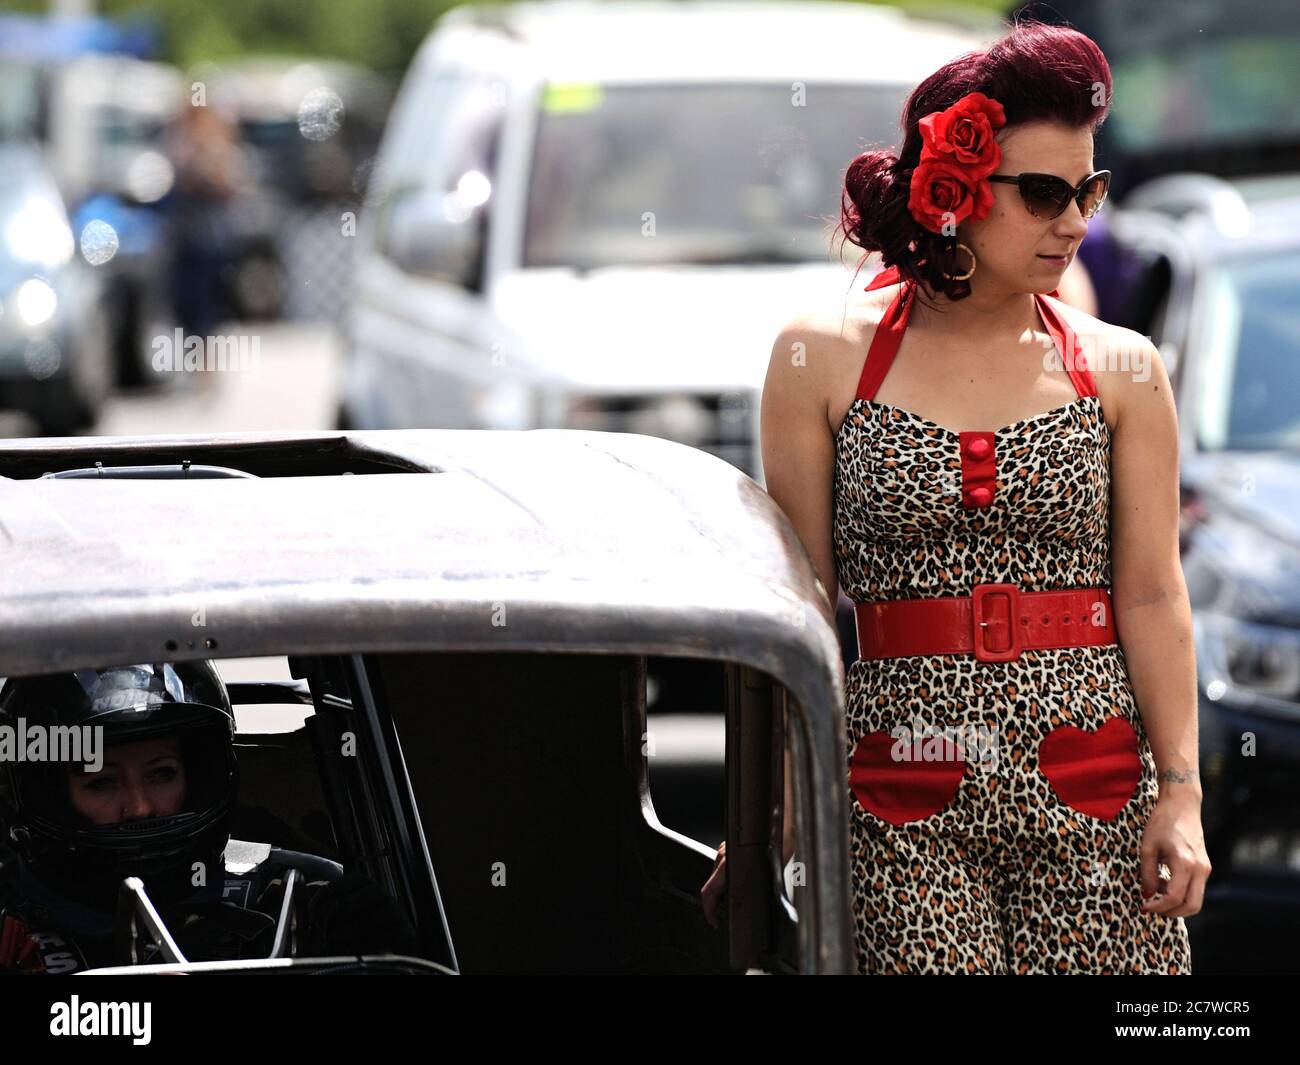 A girl in a Fifties period dress, wearing sunglasses and red flowers in her hair stands next to a dragster at Santa Pod Raceway Stock Photo